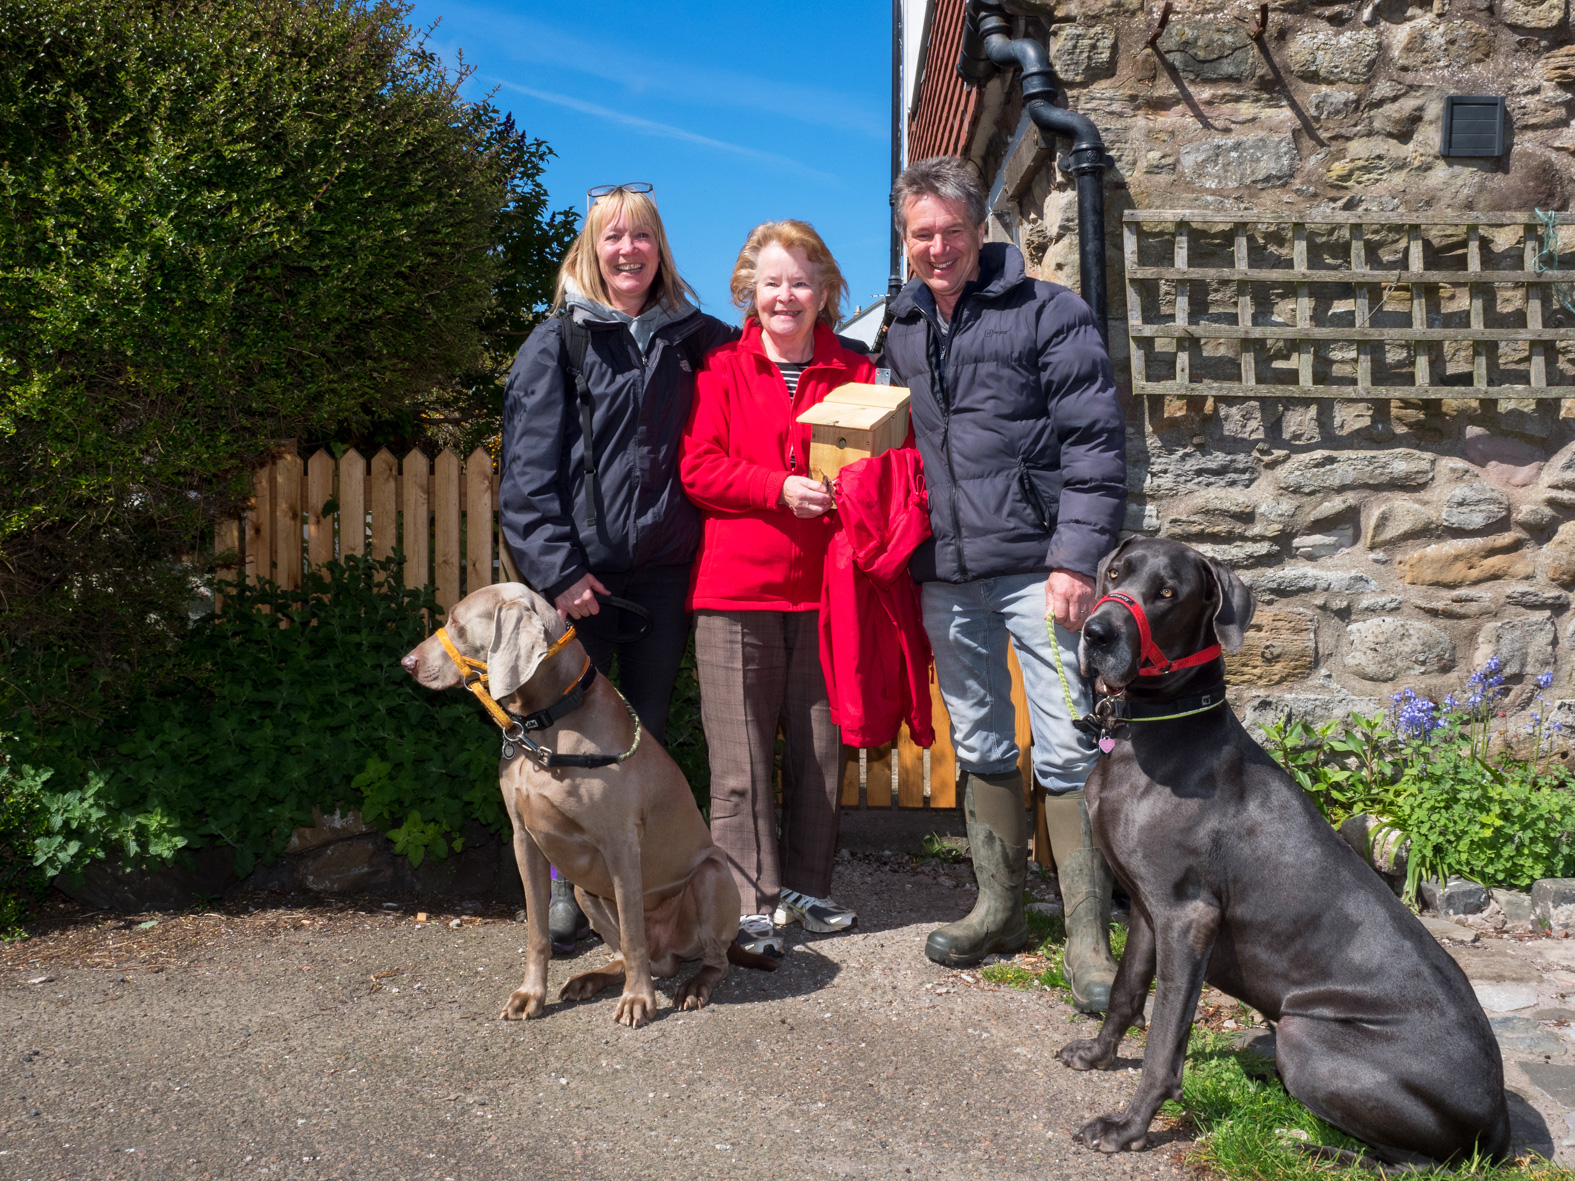 Richard, who works in the motor trade, with wife Helen, mother-in-law Iris and dogs Devon and Dragon on a walk on the tidal island of Lindisfarne. They are all Conservative Party voters and Iris is mayor of Frinton-on-Sea. Northumberland.